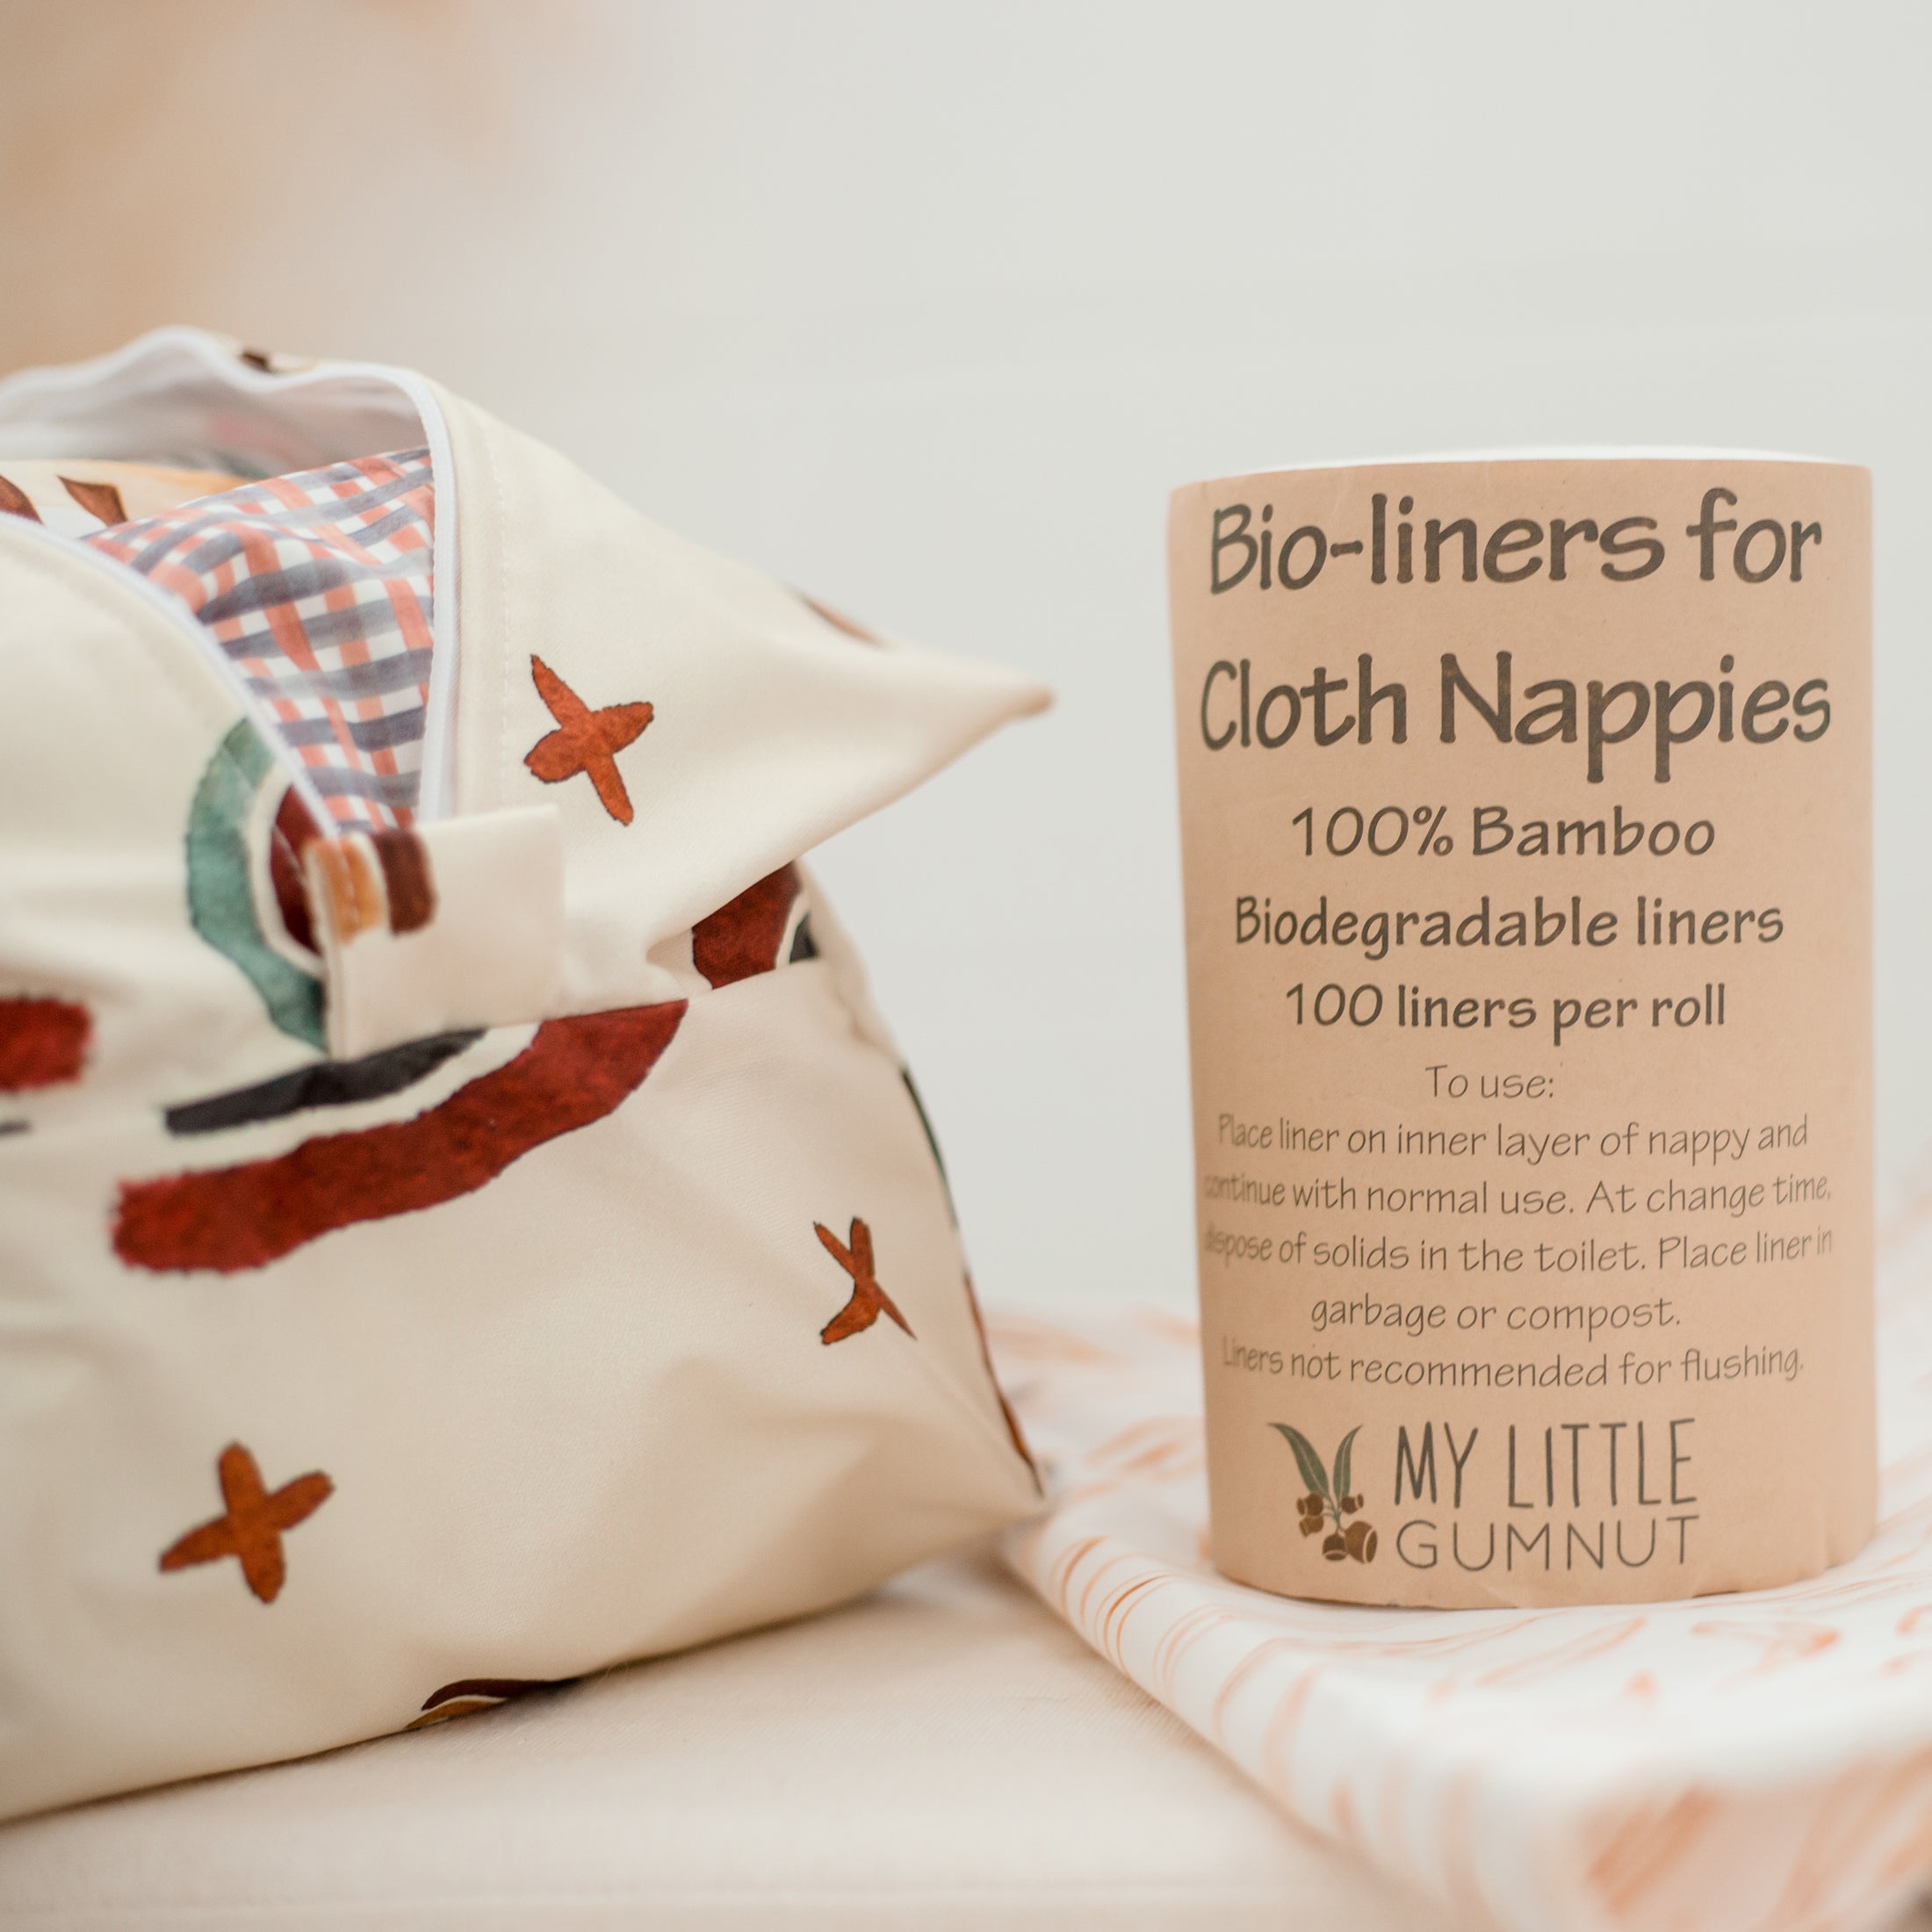 bamboo nappy liners for Cloth Nappies. bio-liners for reusable nappies. cloth nappies by my little gumnut. australian cloth nappies. Roll of 100 Nappy liners. Nappy pod. 